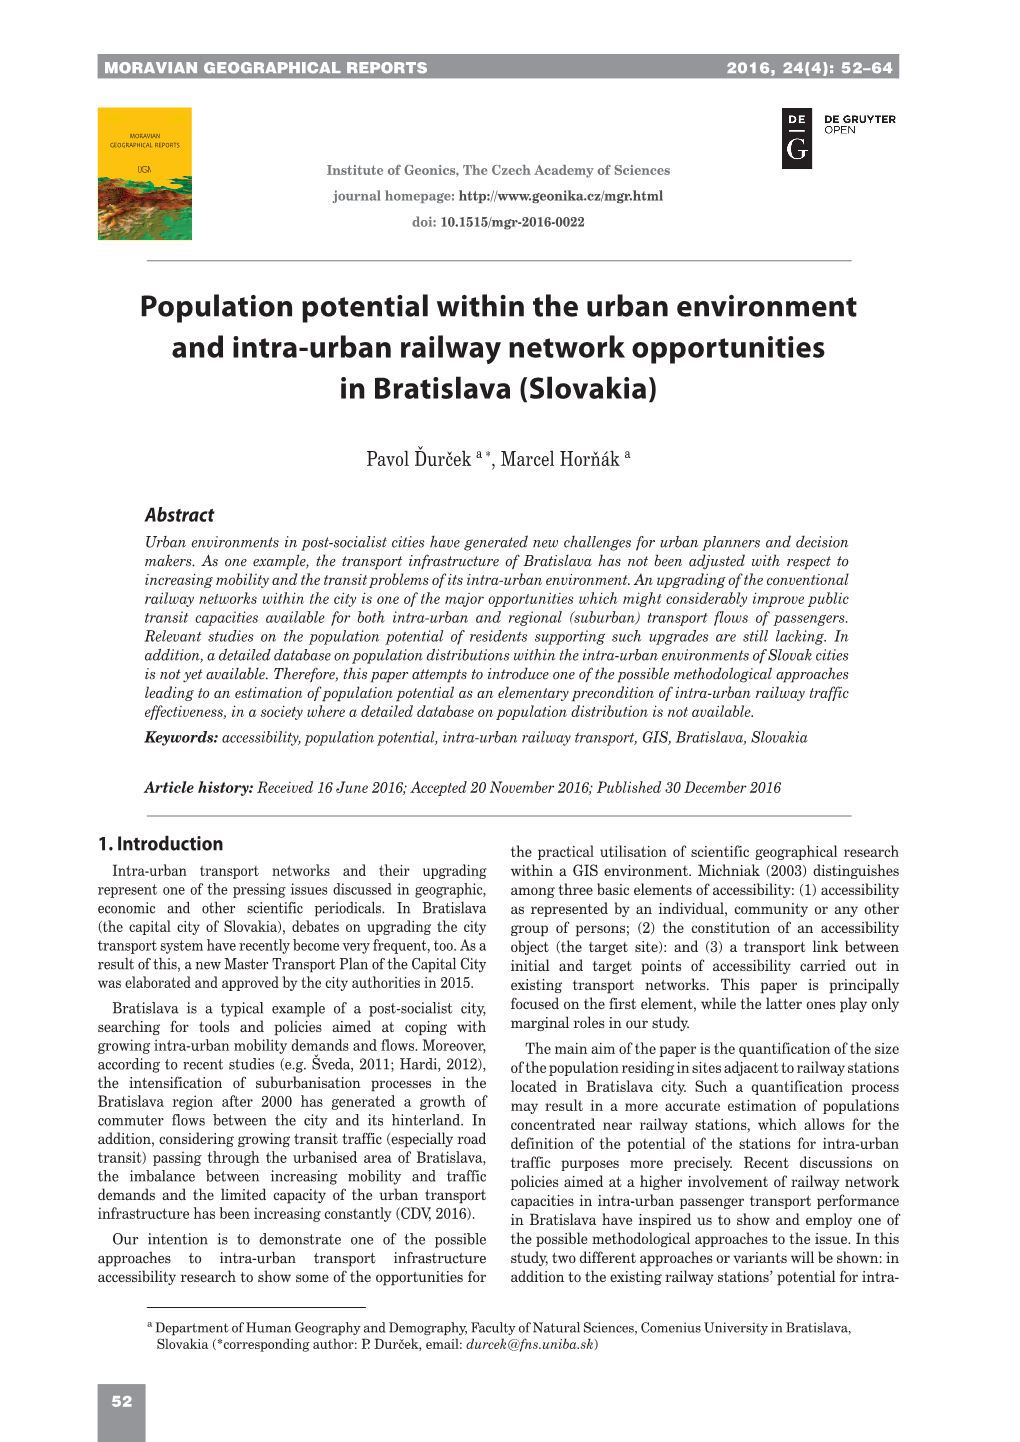 Population Potential Within the Urban Environment and Intra-Urban Railway Network Opportunities in Bratislava (Slovakia)